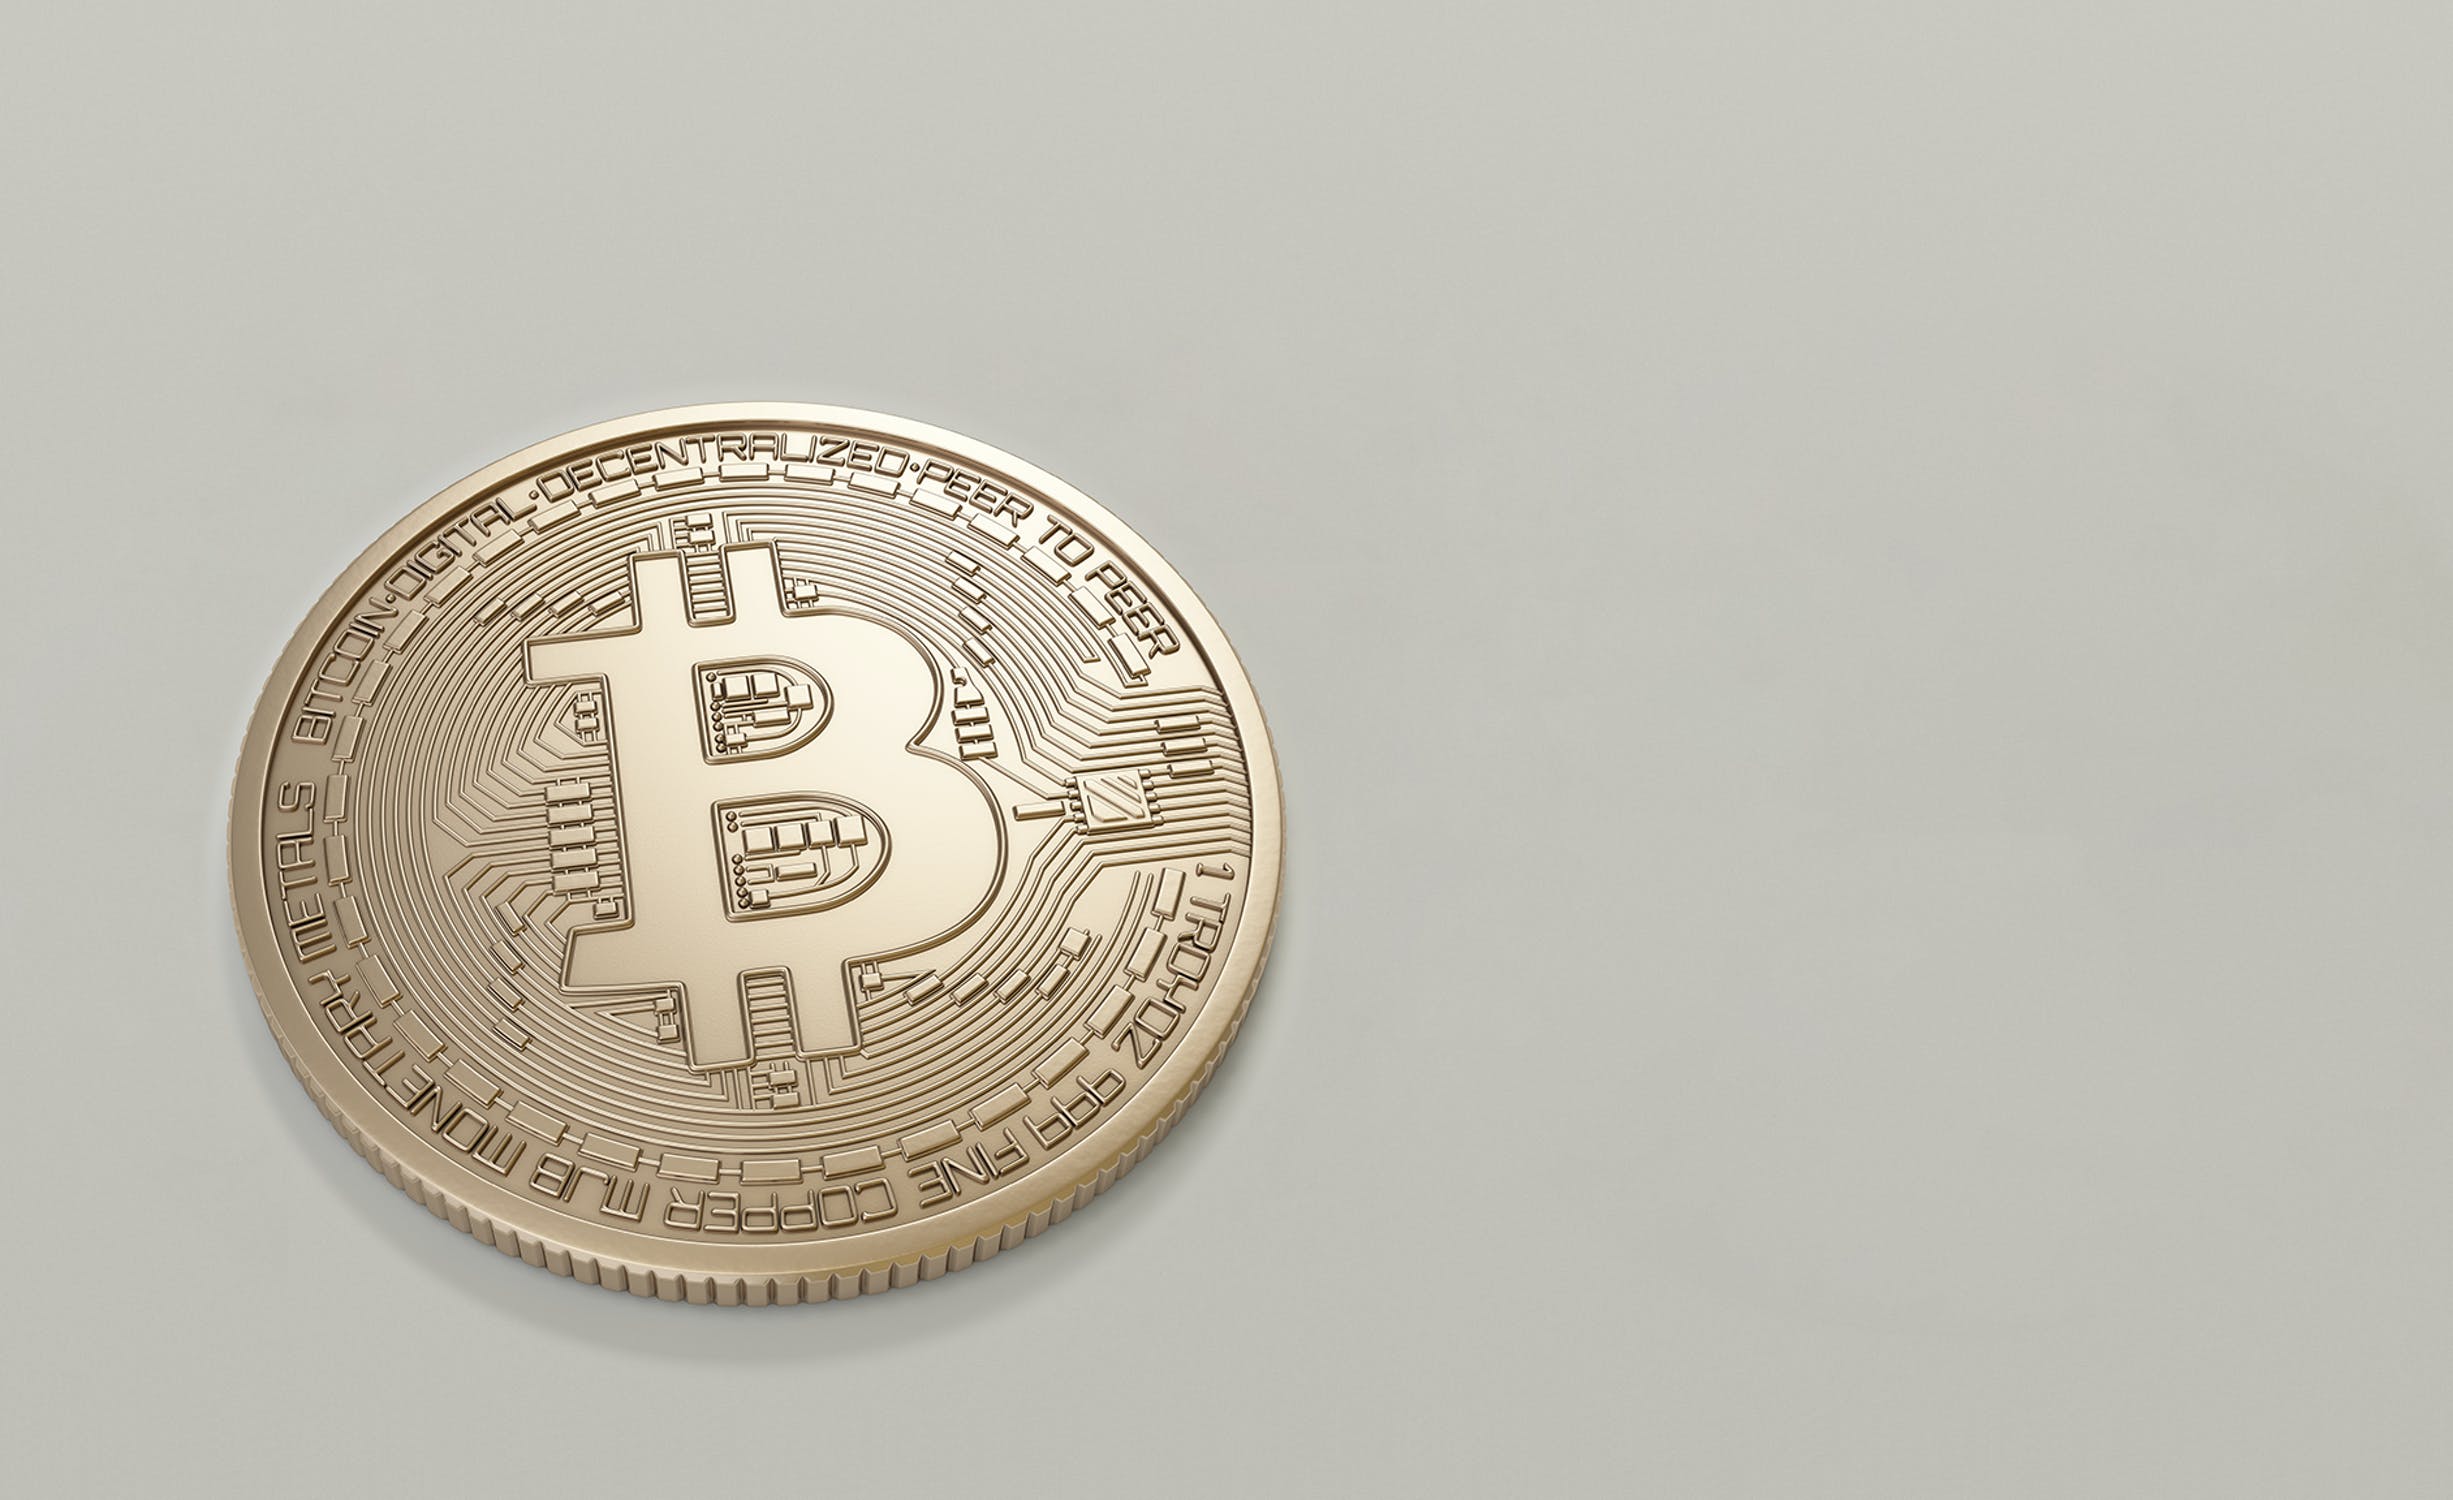 Let us know what is the secret behind the increasing popularity of bitcoin